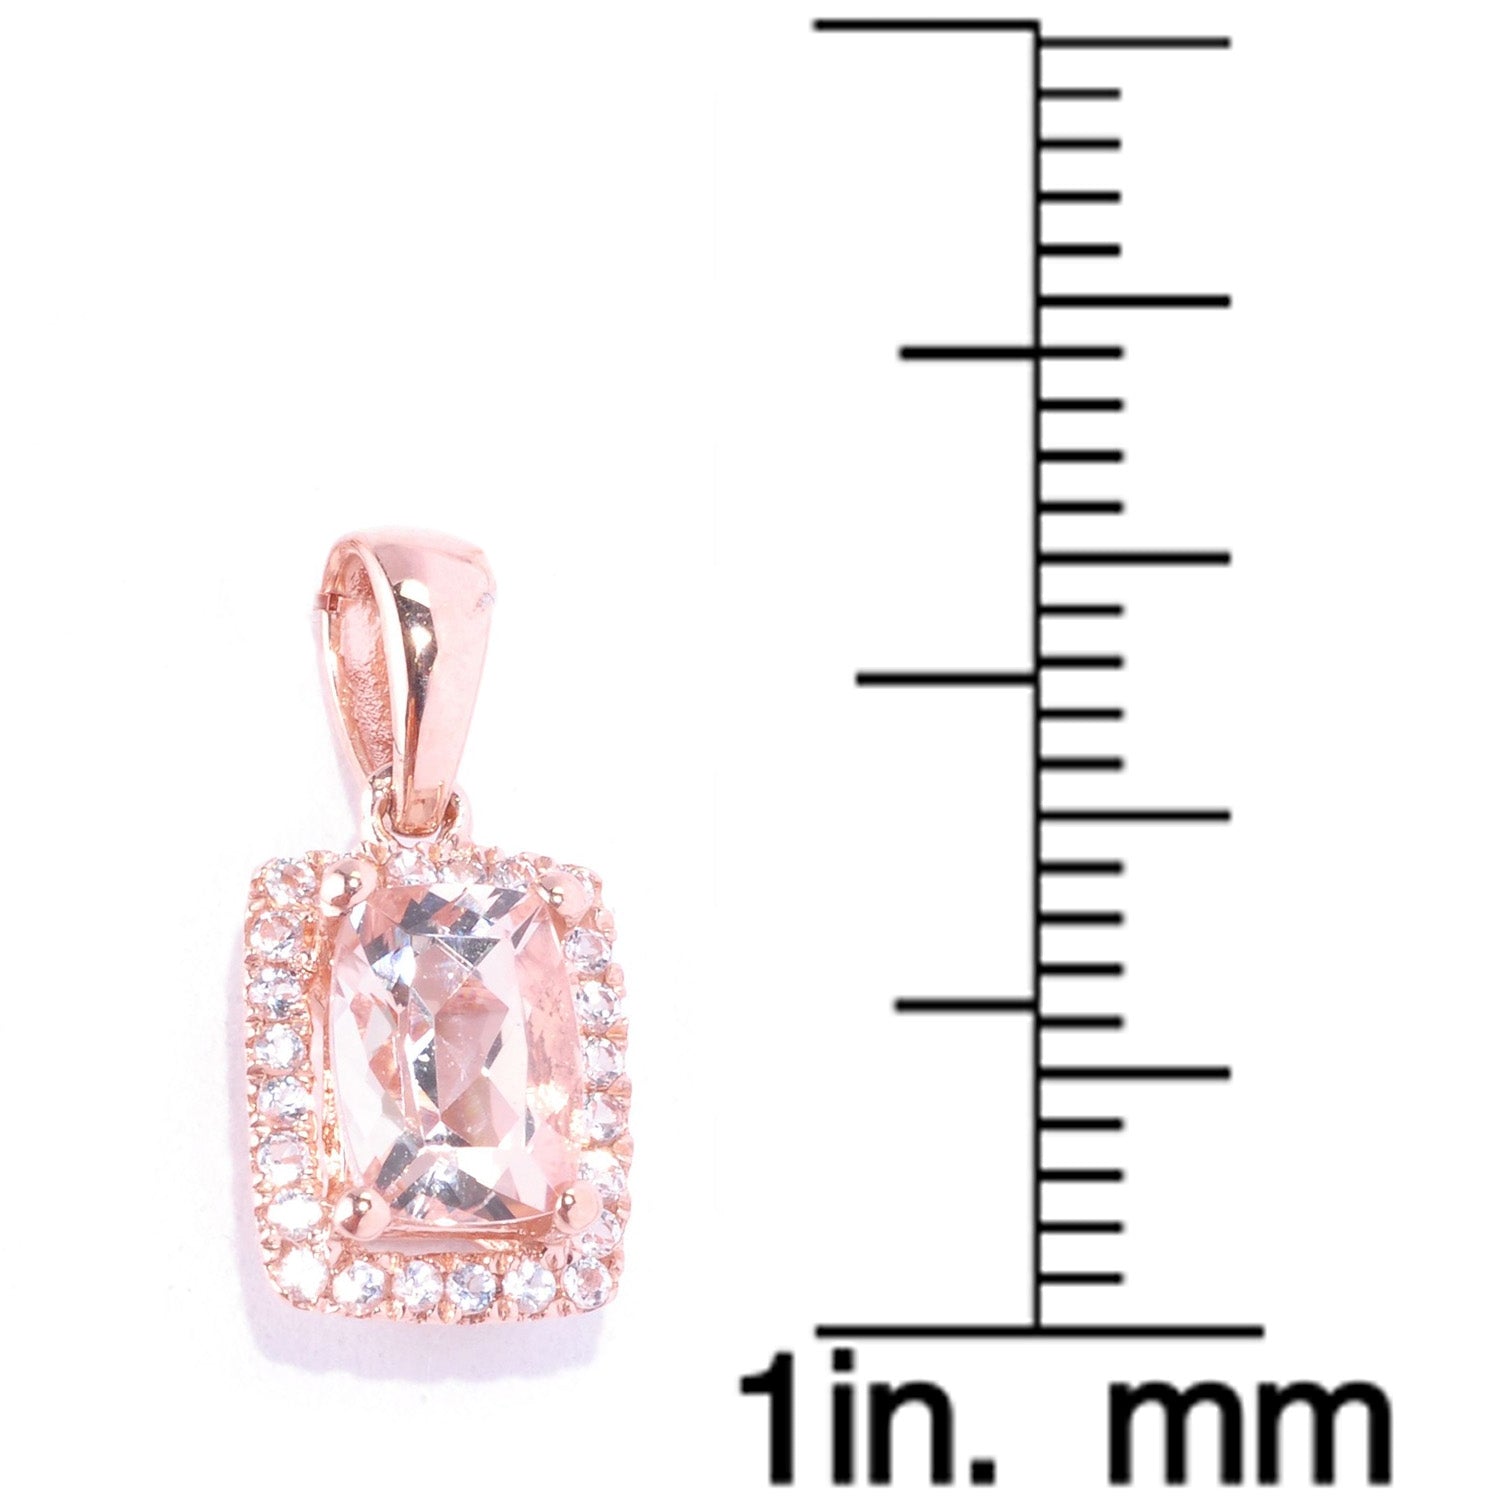 10KT Rose Gold Morganite and Diamond Halo Pendant Necklace - Pinctore